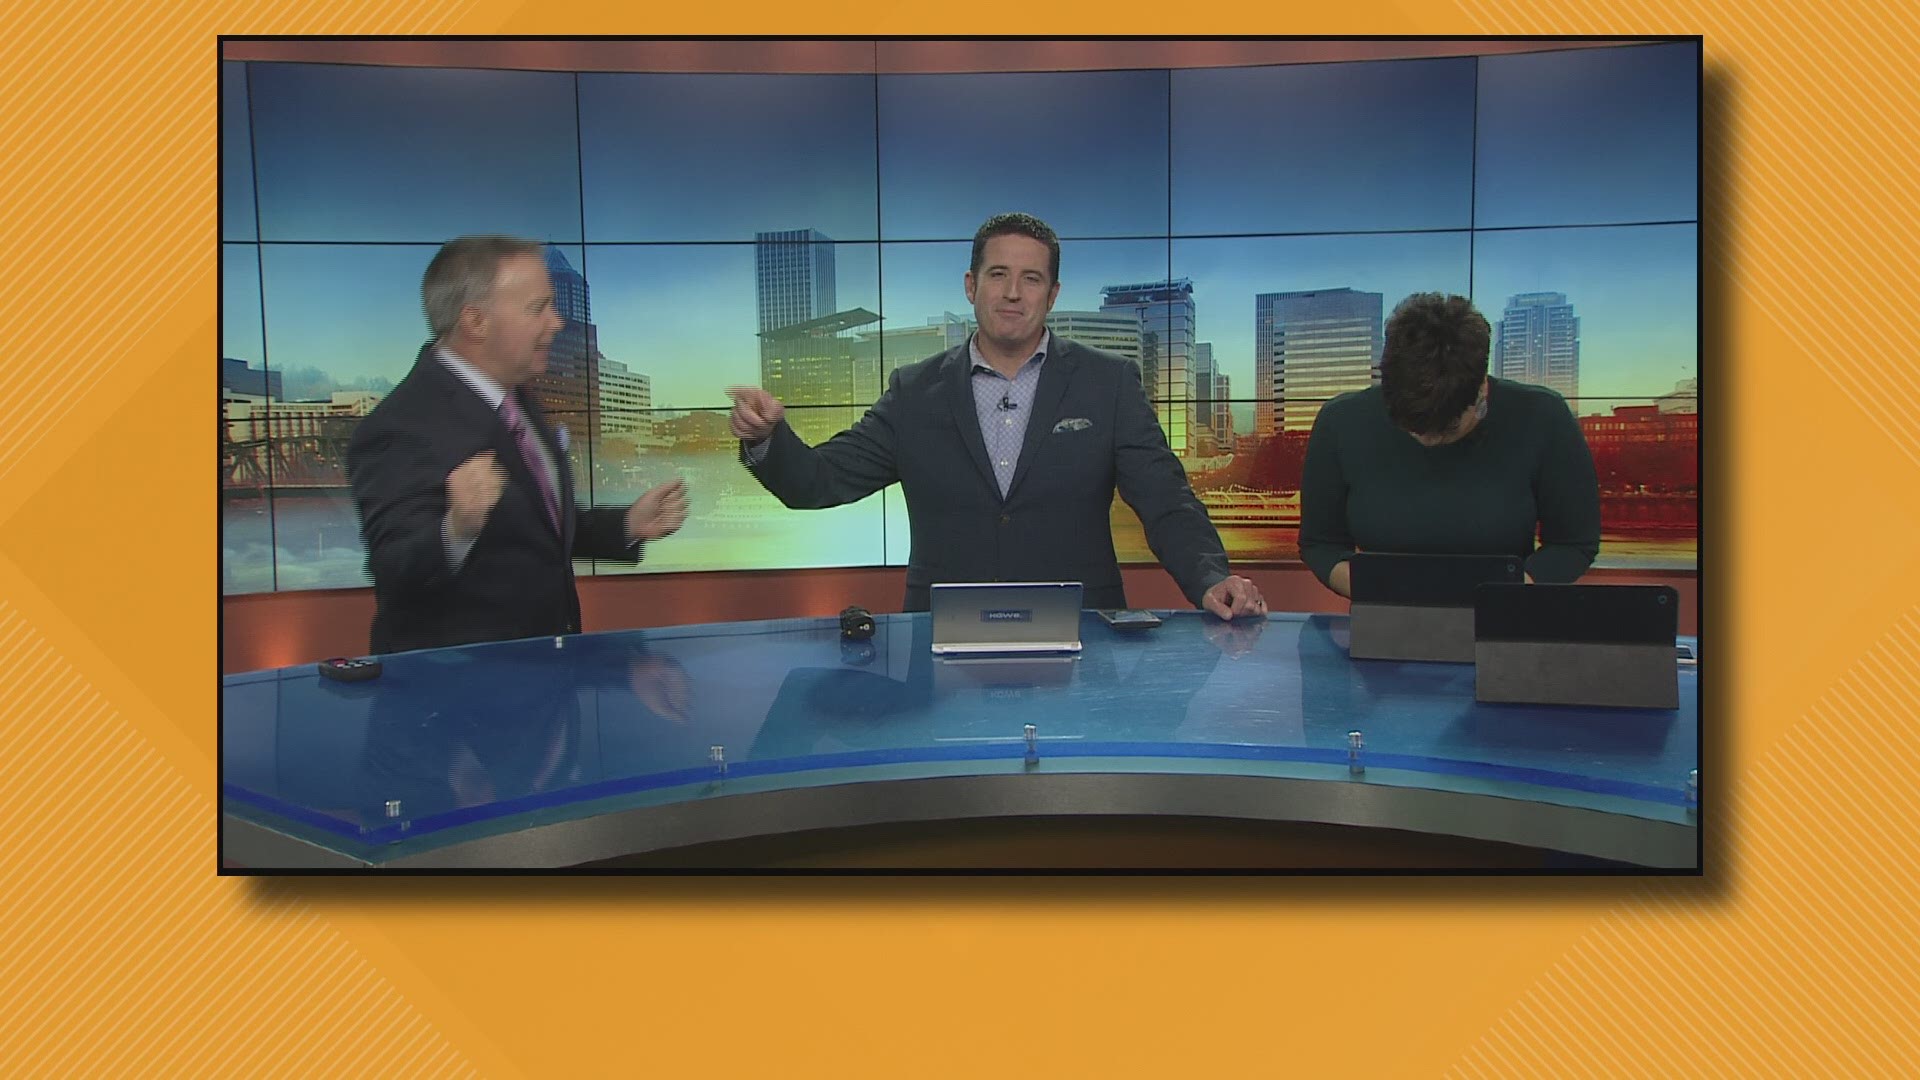 The funniest moments from this week on KGW Sunrise.

Subscribe: https://www.youtube.com/c/KGWNews8
Get the new KGW app: https://kgw.com/appredirect